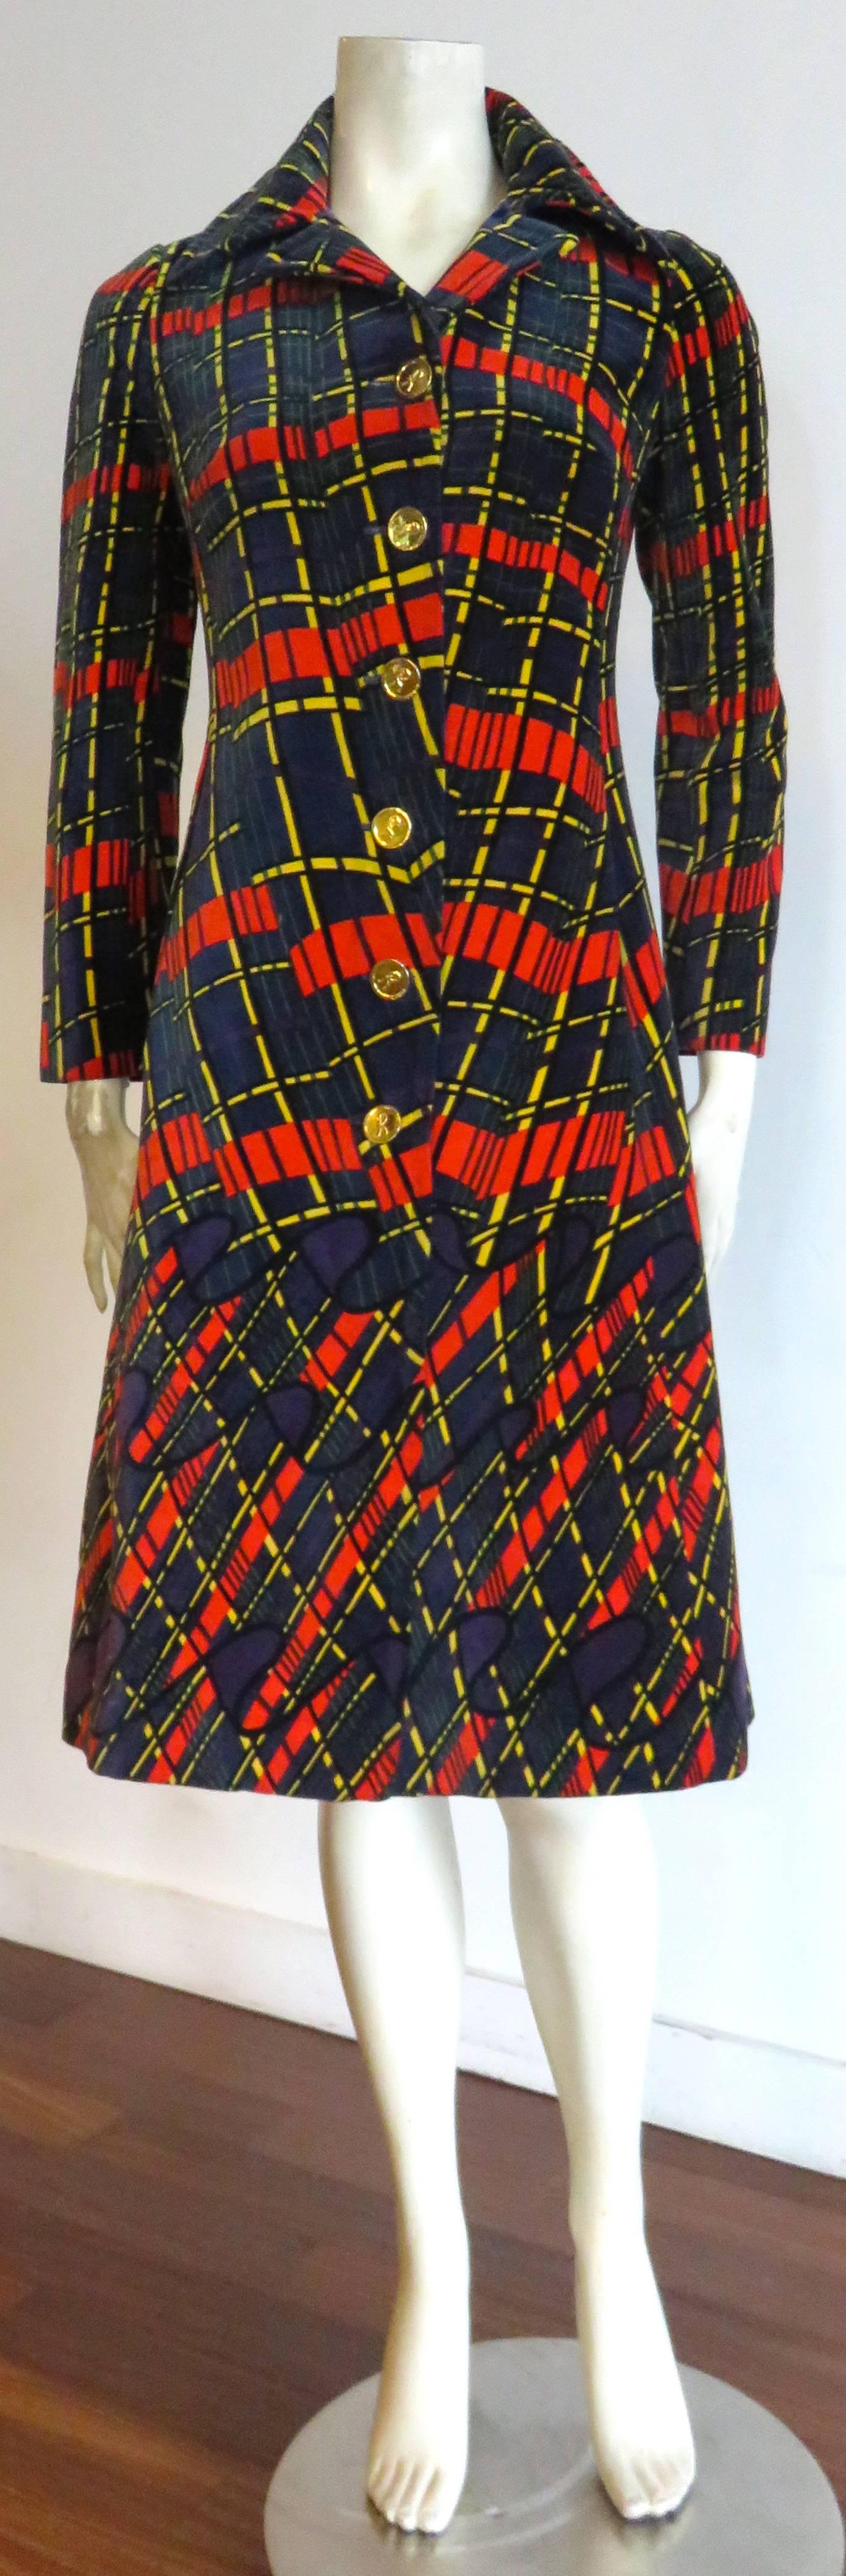 Excellent condition, 1970's ROBERTA DI CAMERINO, Trompe l'oeil plaid velvet coat.

Ulta-soft, plush velvet fabric featuring abstract plaid, artwork print in dark navy ground with golden yellow, and red. The printed artwork features wavy, trompe